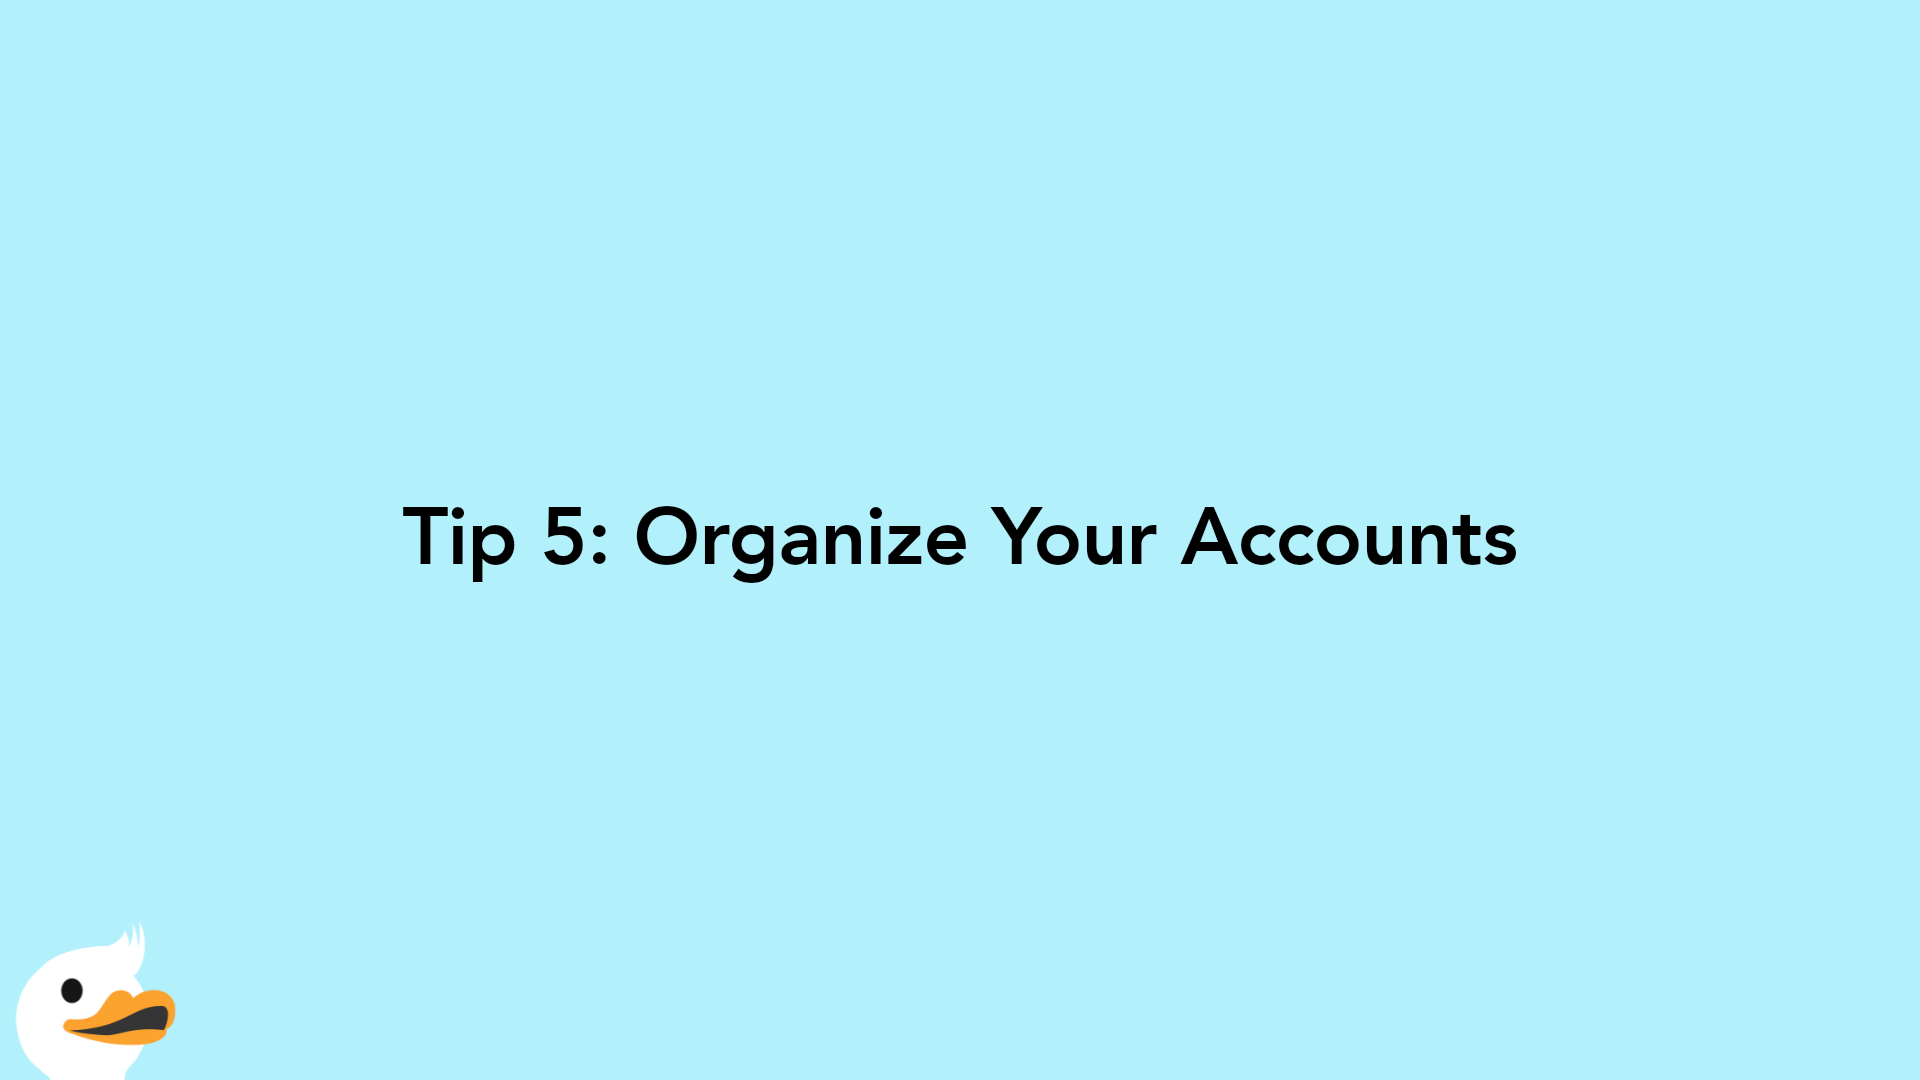 Tip 5: Organize Your Accounts